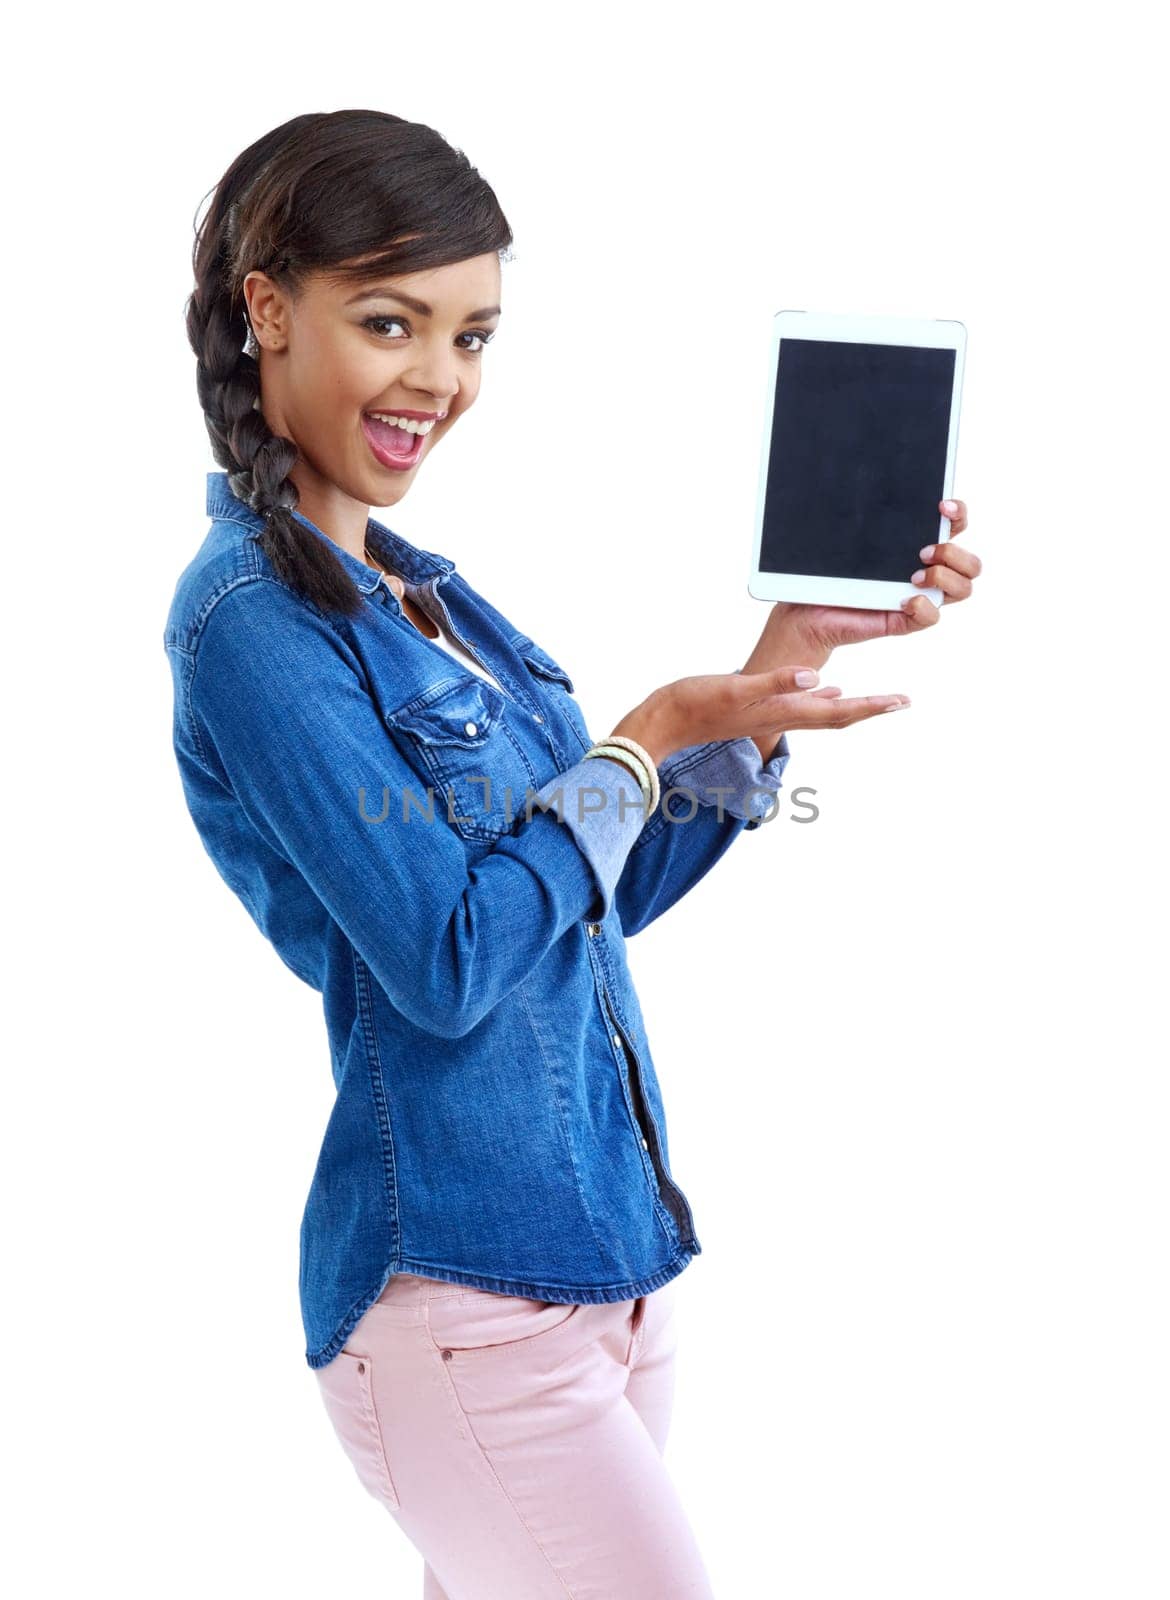 Girl, portrait and presentation of tablet screen in studio for ebook reader or learning app on white background. Excited student with digital marketing for online education or electronic resources by YuriArcurs